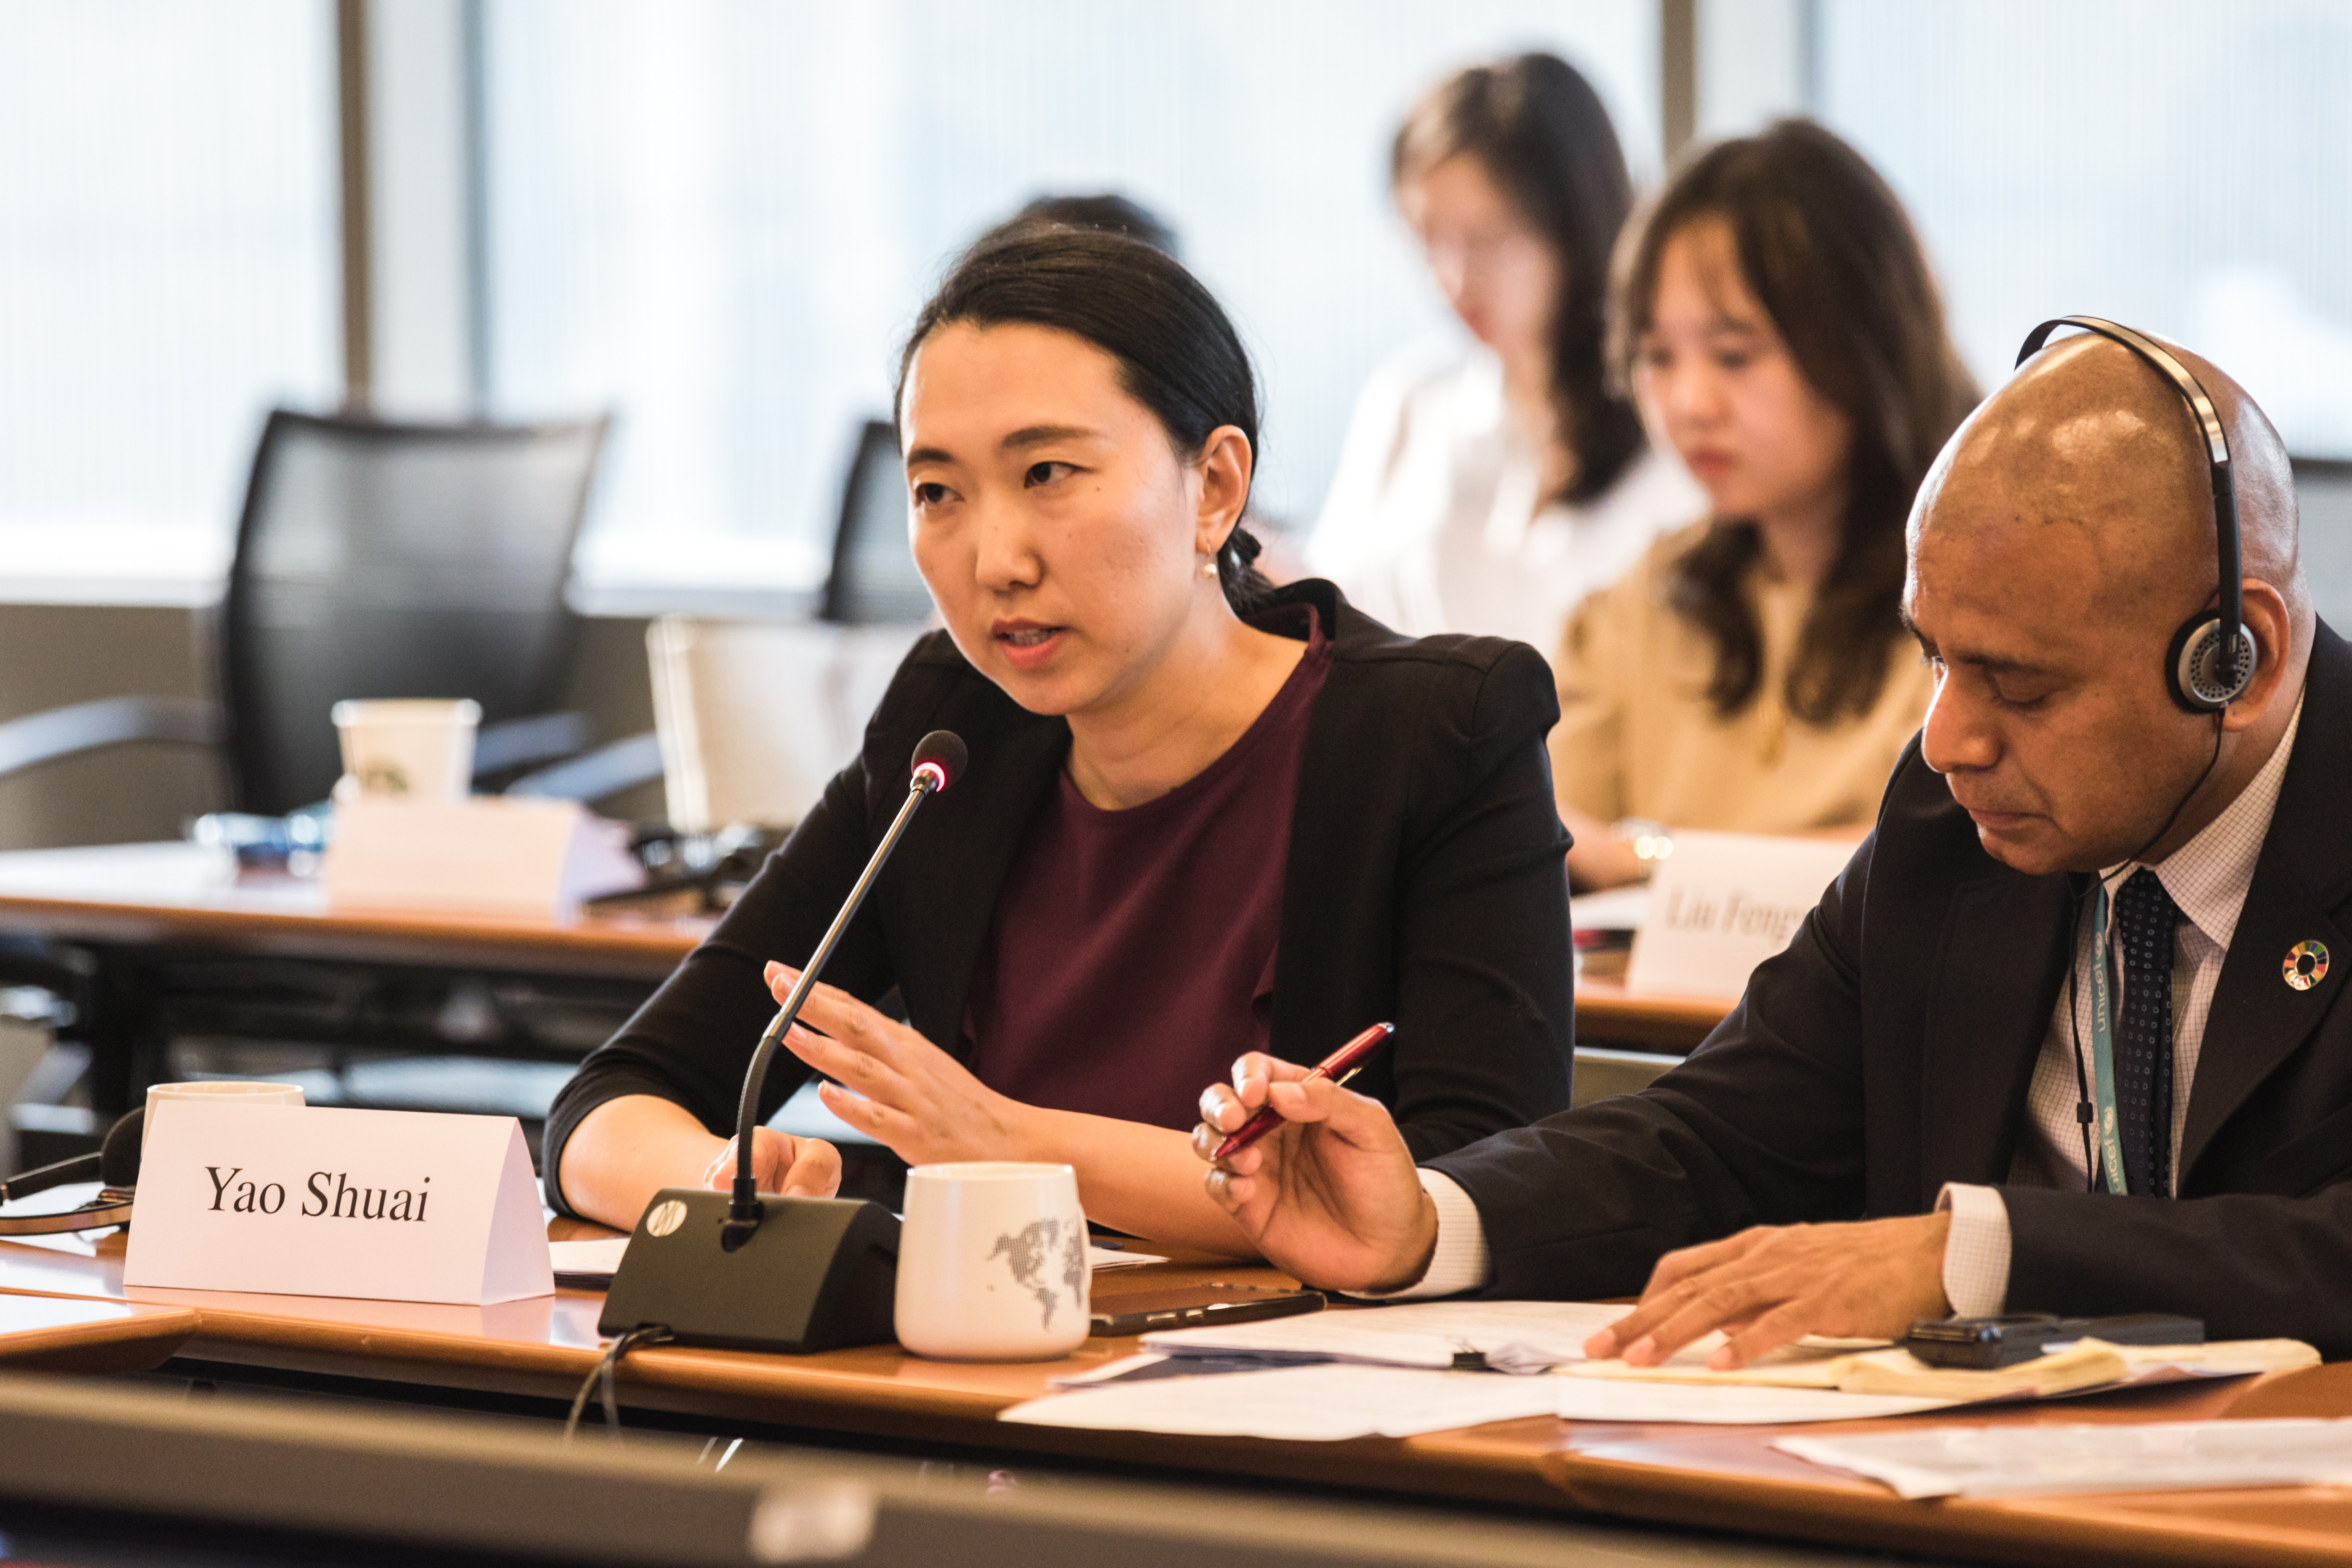 Dr. Yao Shuai (left), Deputy Director of the Institute of International Development Cooperation, Chinese Academy of International Trade and Economic Cooperation, speaks at the launch event of the report at World Bank’s Beijing Office on 9 July 2021.